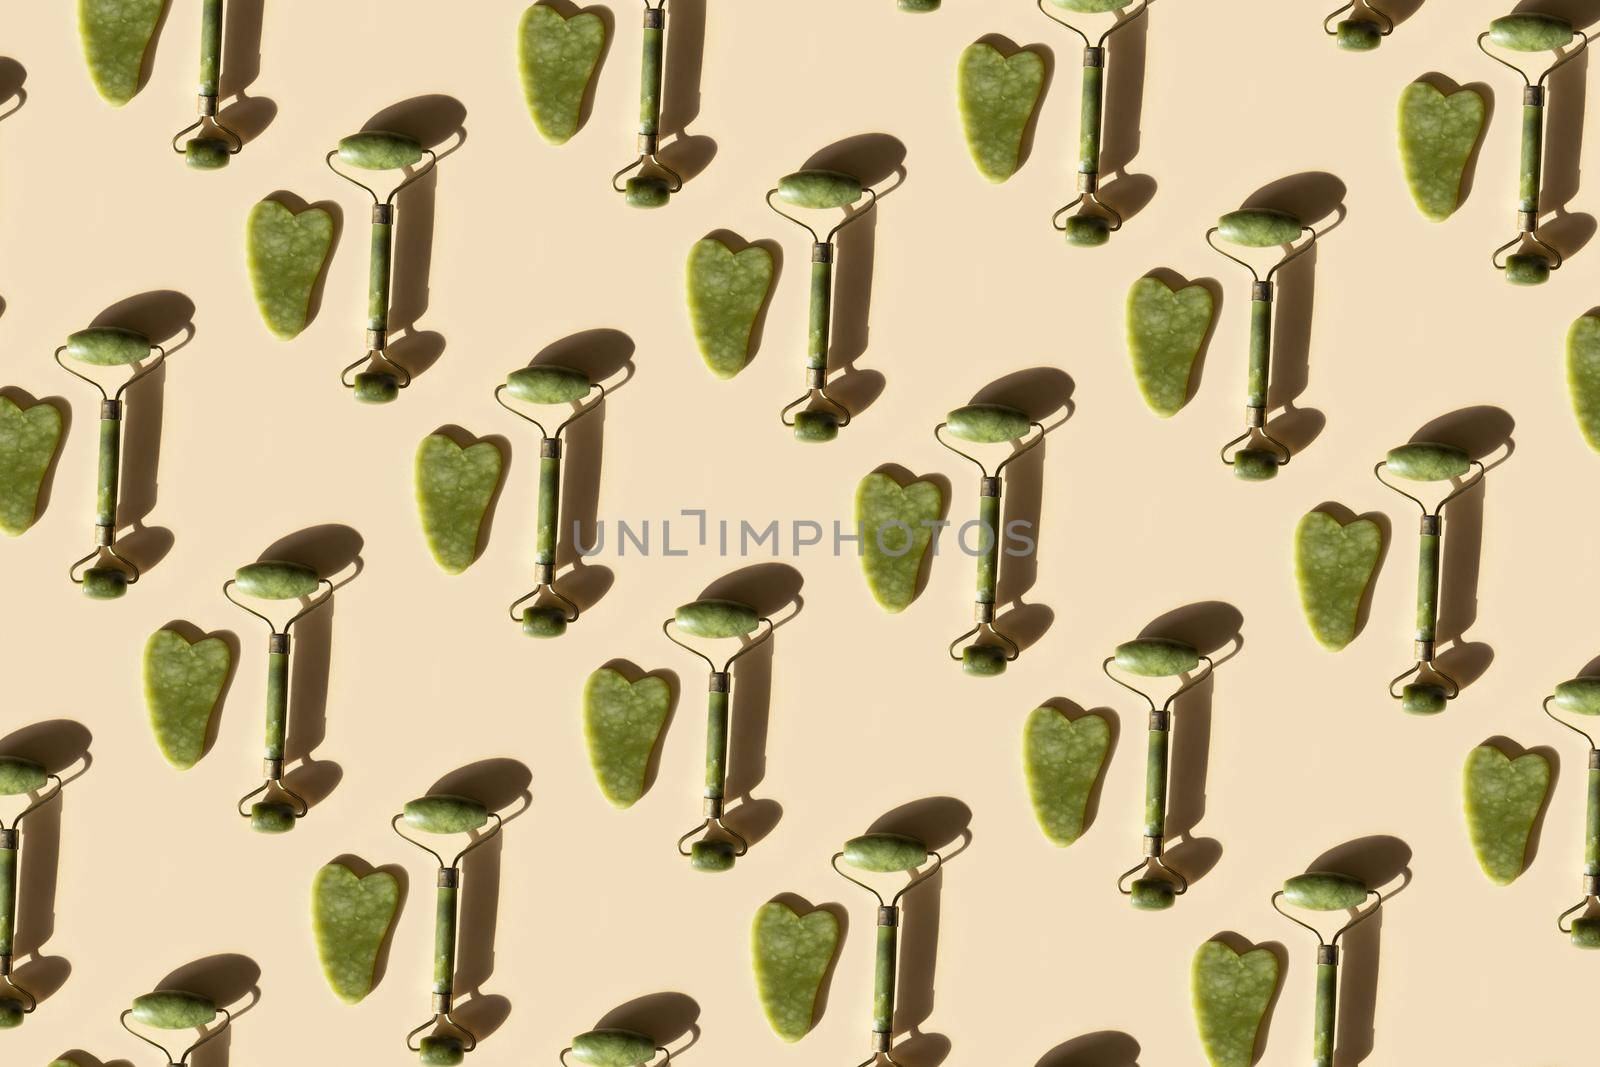 Repeating pattern with jade Gua sha scraper and facial massager on beige background. Hard light, shadows, the concept self-care. Facial care. Zero waste. Lifting and toning treatment at home.